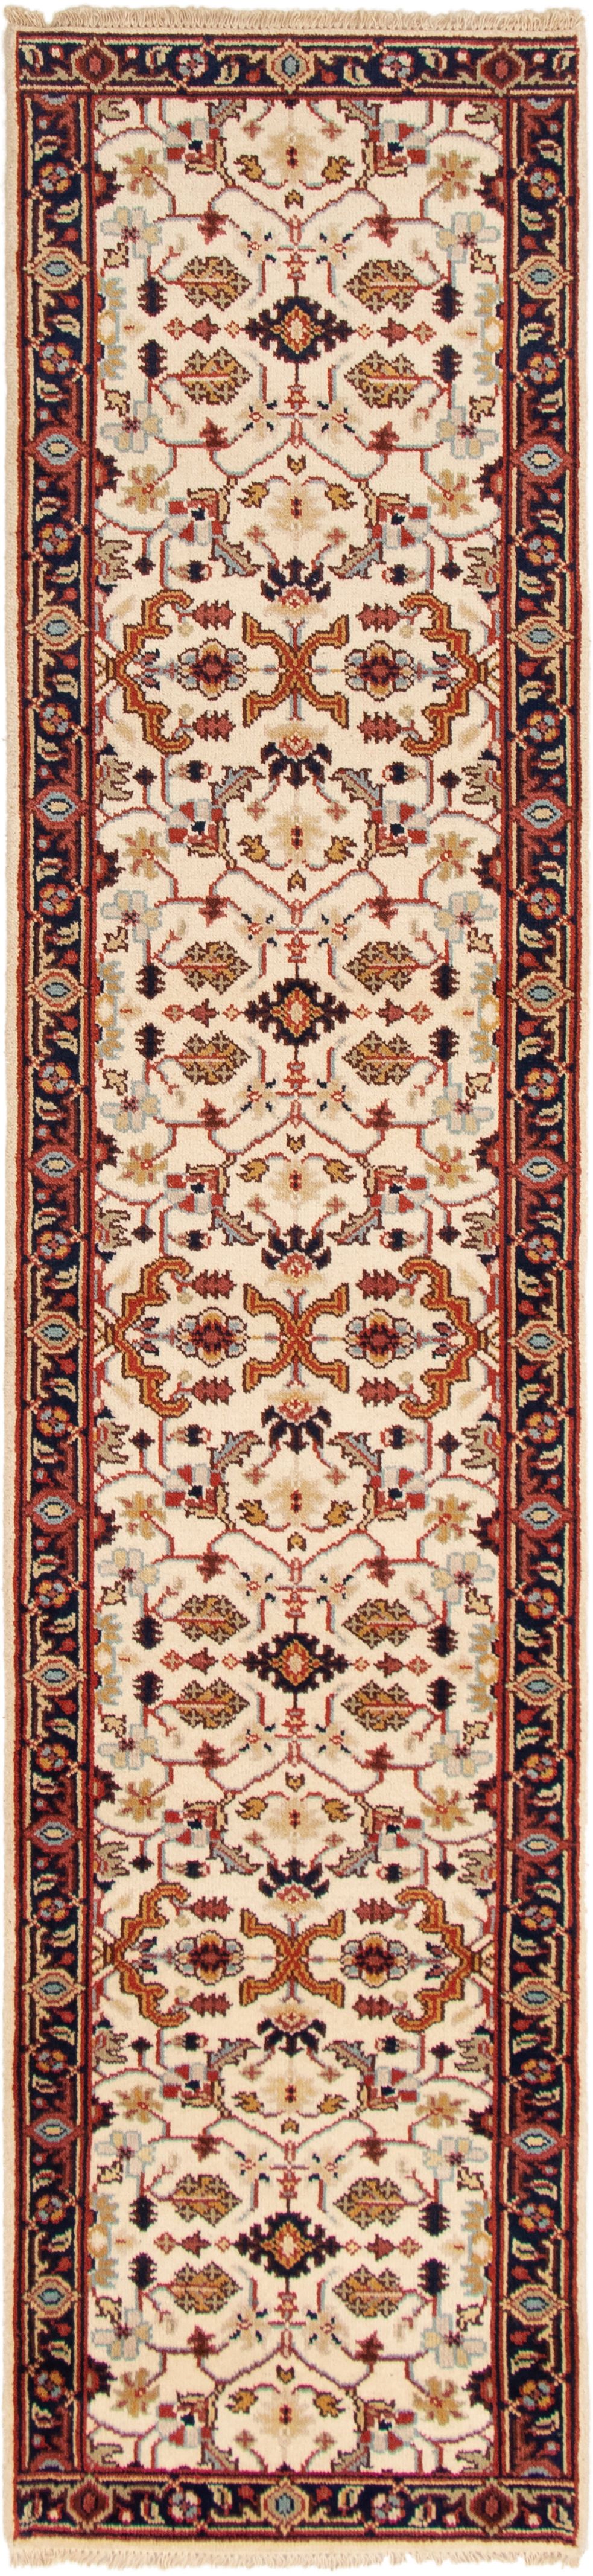 Hand-knotted Serapi Heritage Cream Wool Rug 2'7" x 11'8" Size: 2'7" x 11'8"  